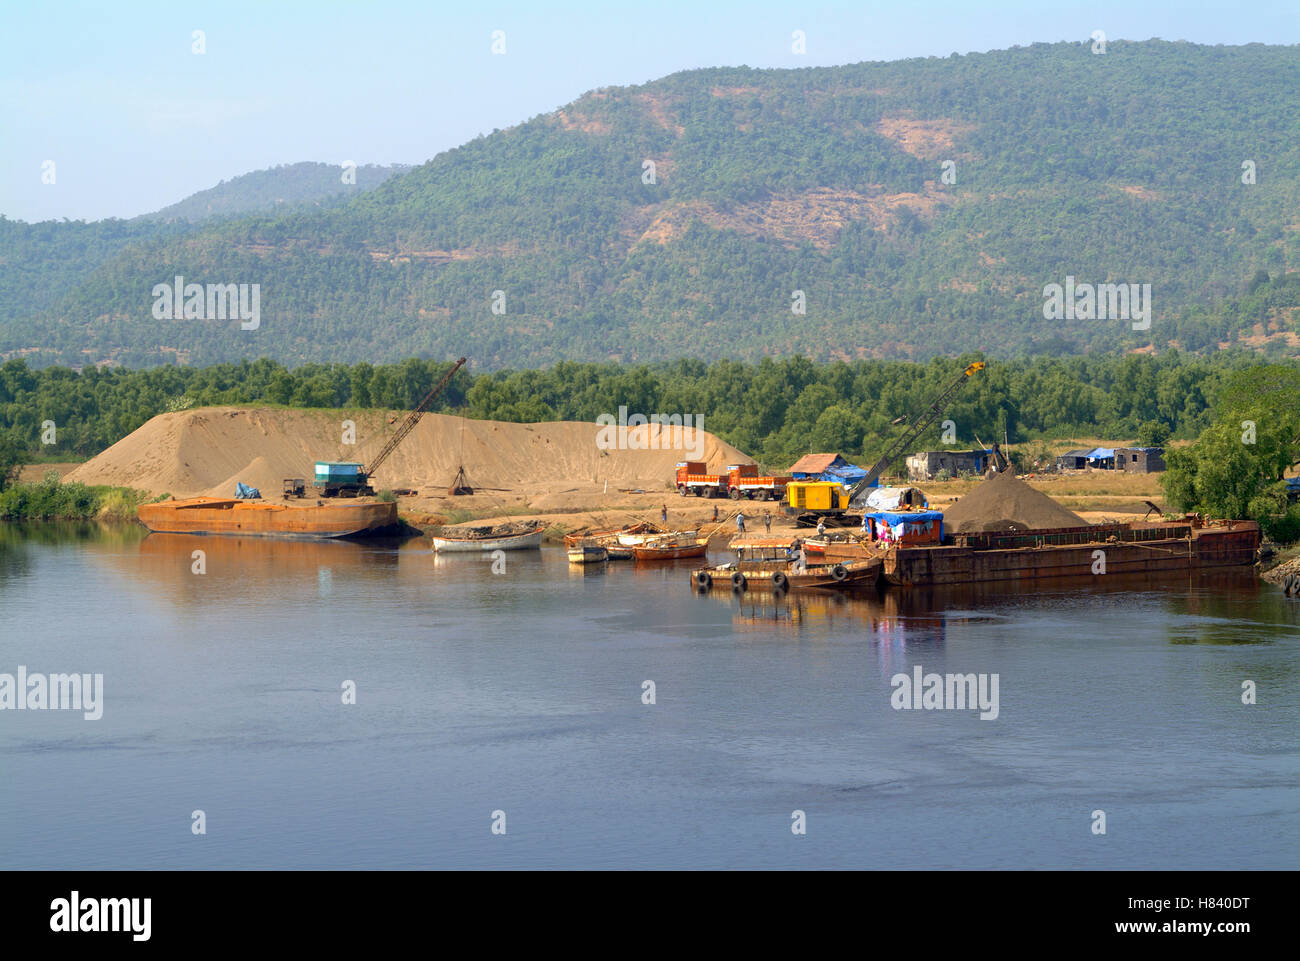 Sand mining. Barges and small boats used for transport Stock Photo